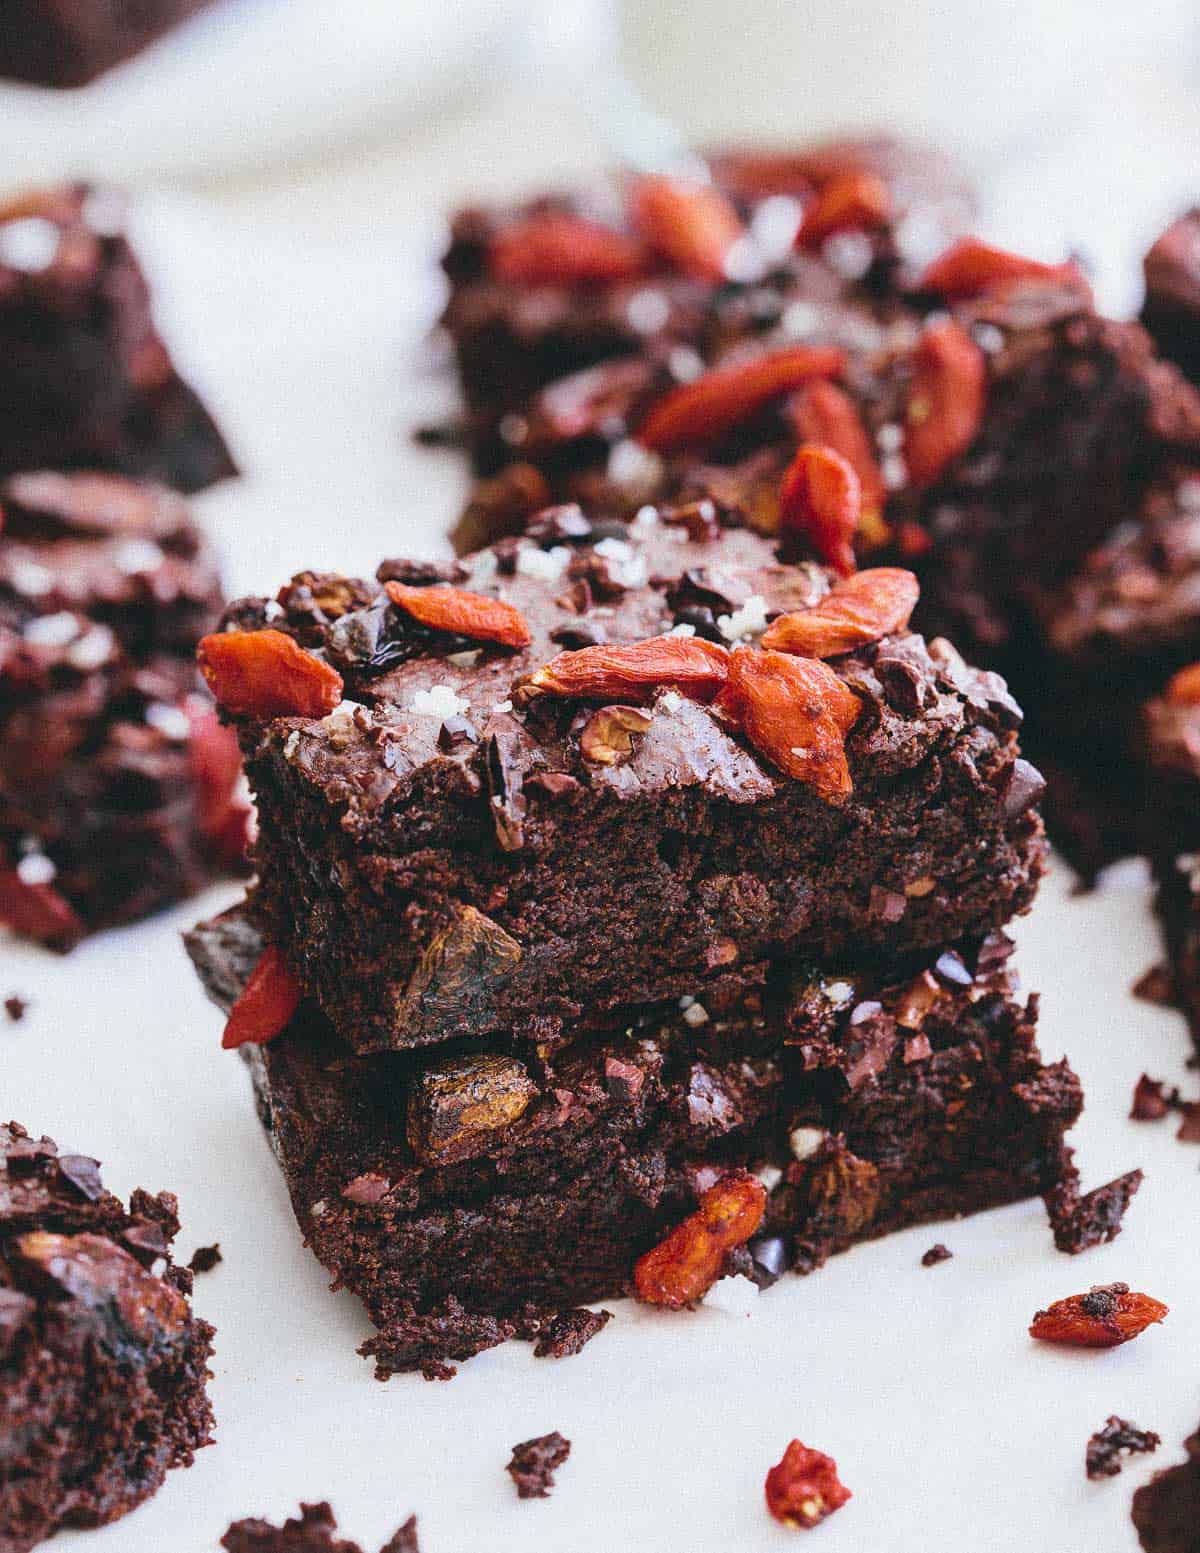 Goji berry and cacao nib superfood brownies are the perfect chocolaty gluten free dessert.